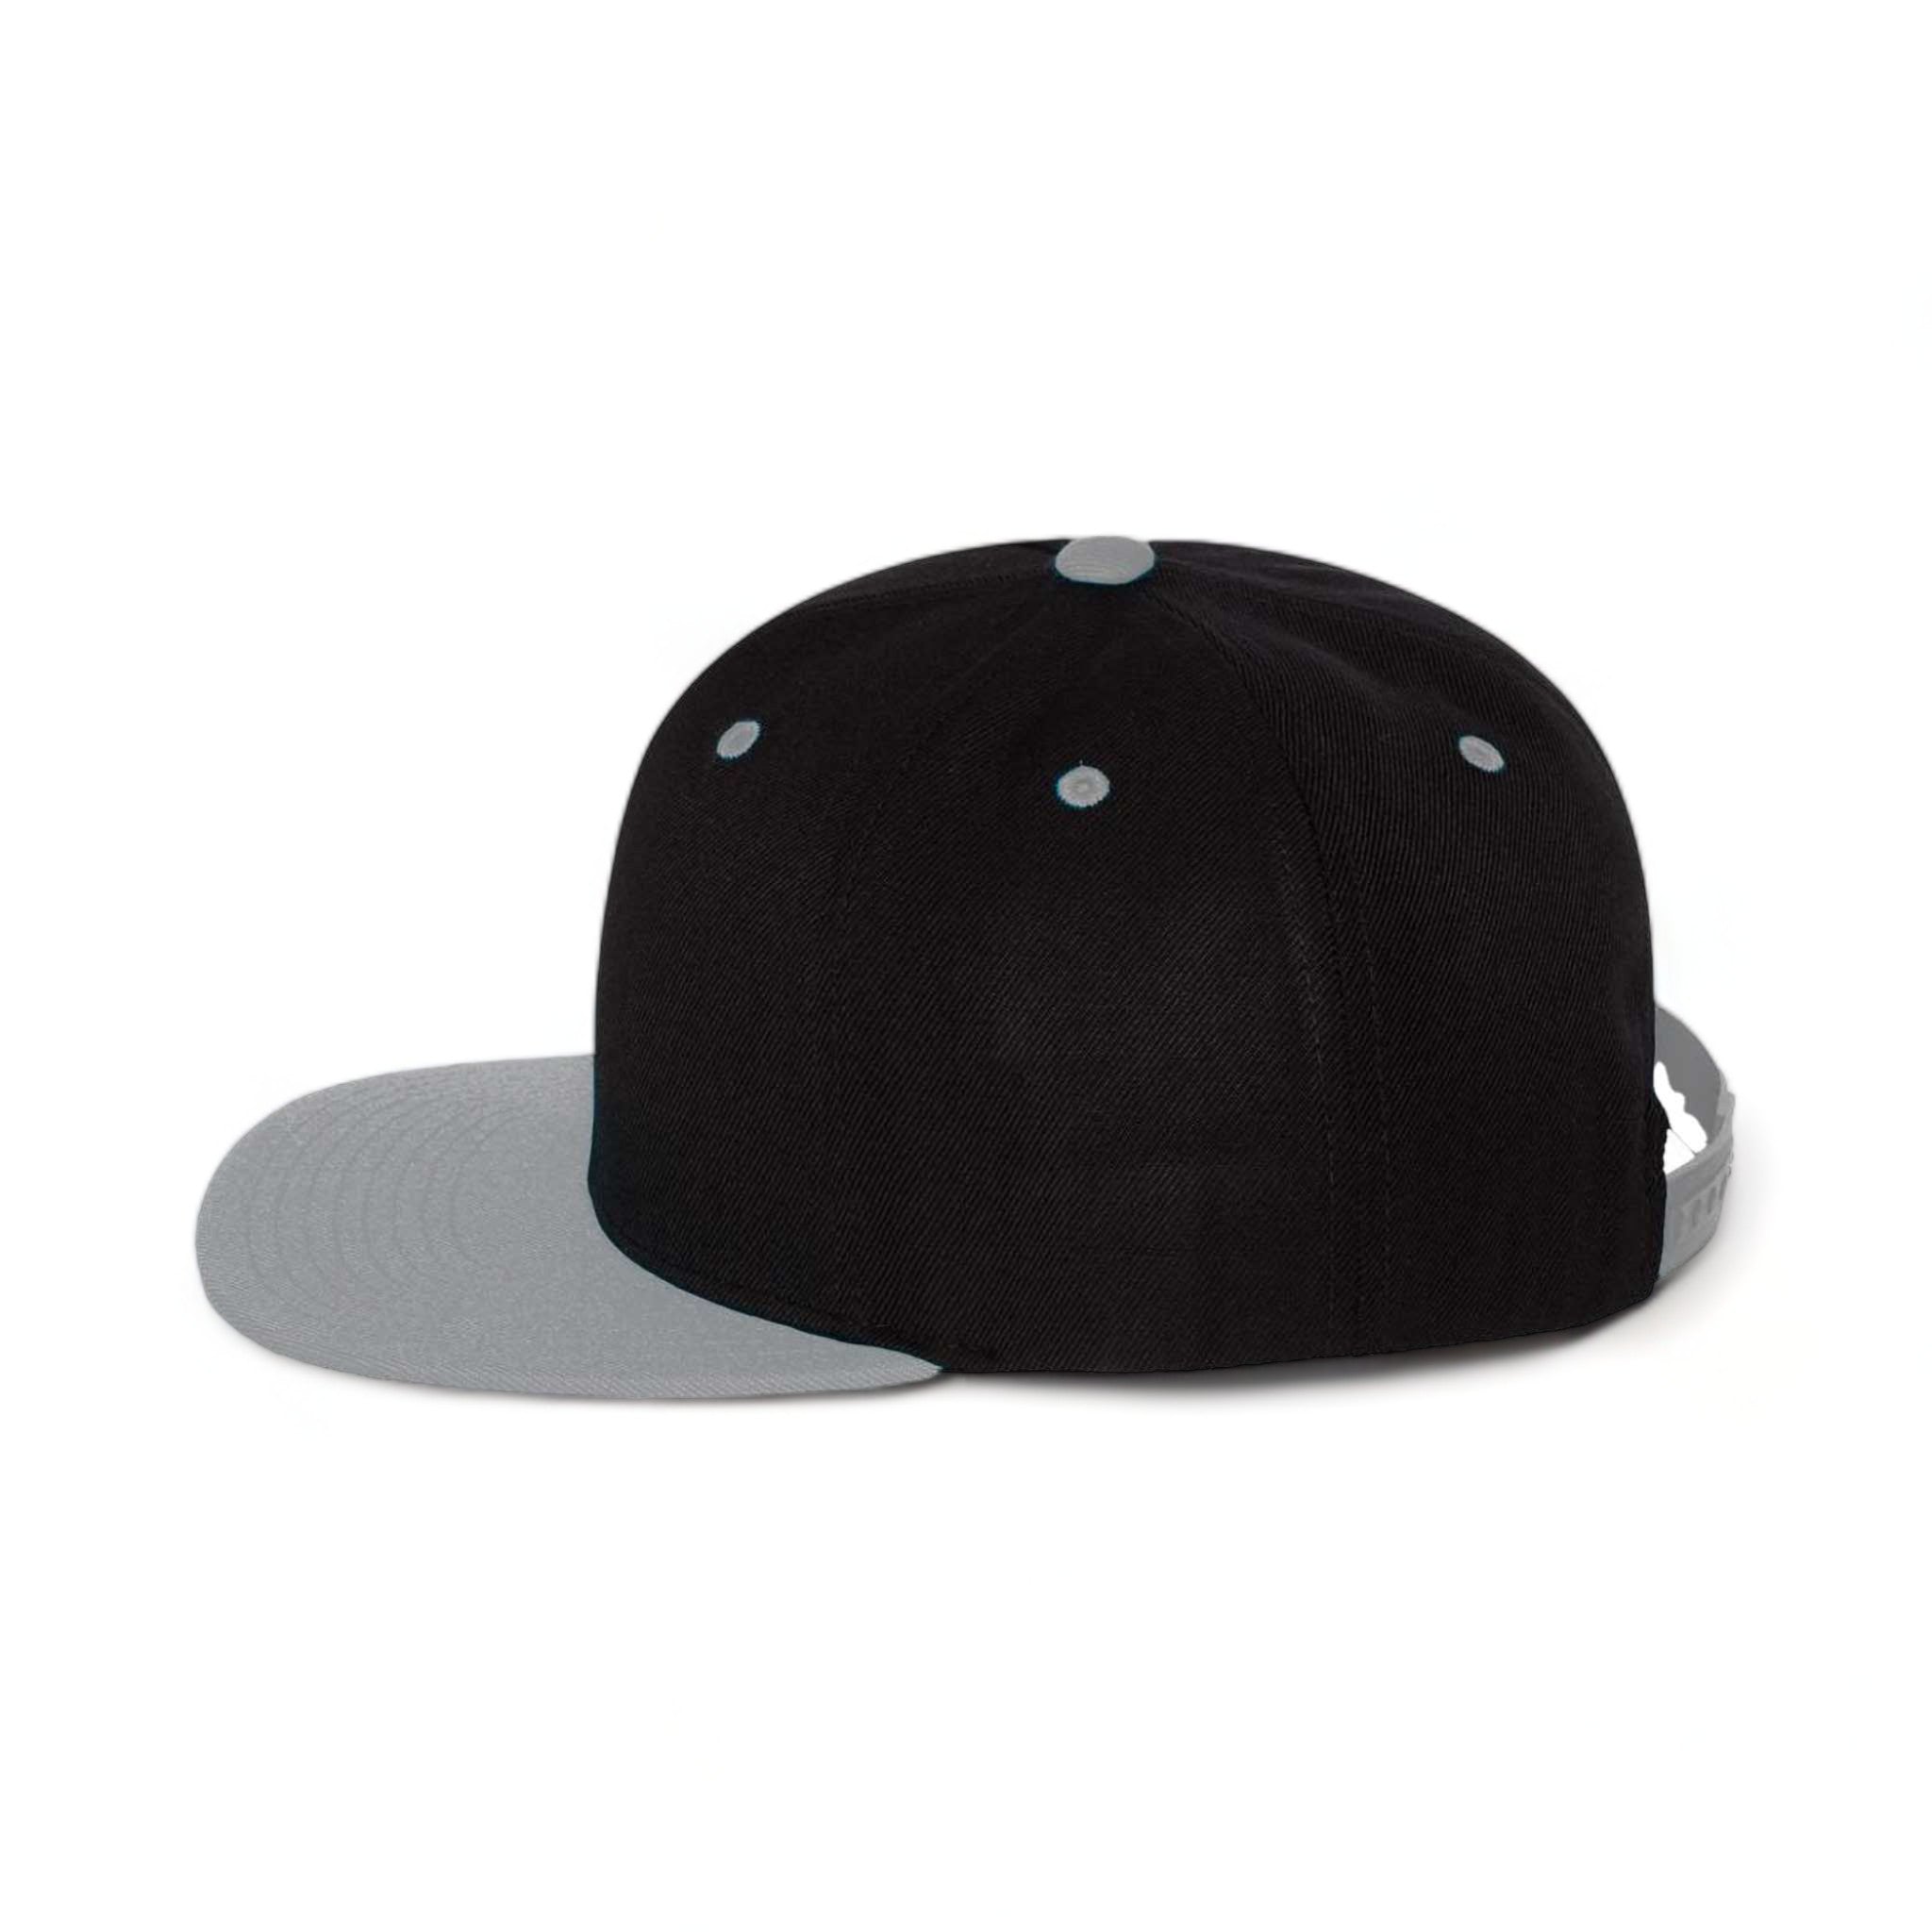 Side view of YP Classics 6089M custom hat in black and silver